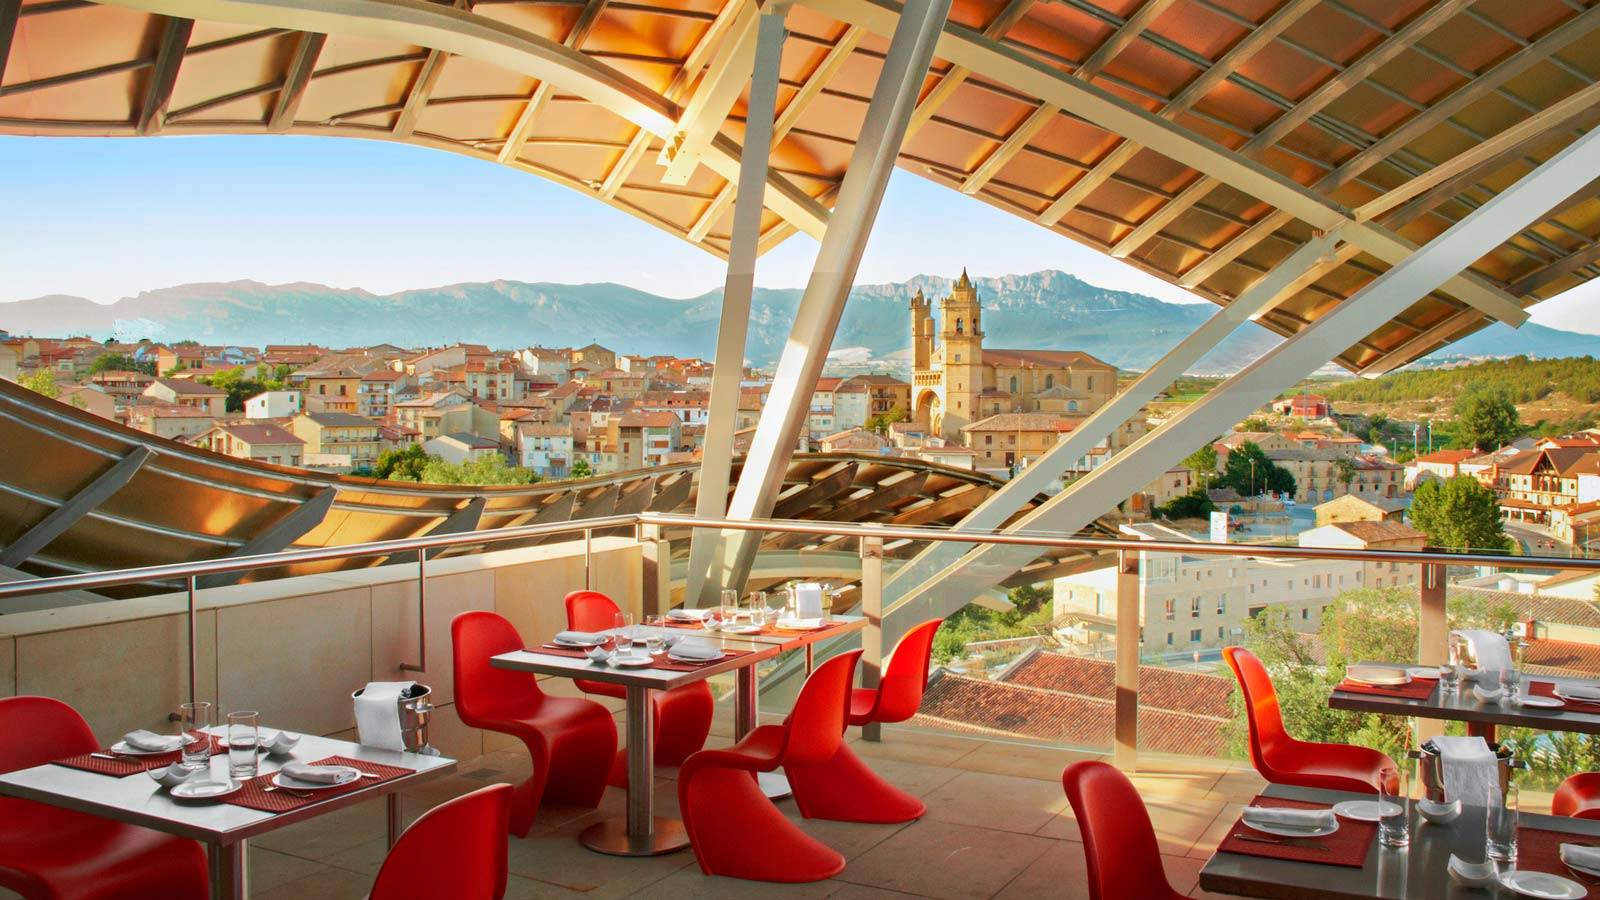 Views over the vineyards from Hotel Marques de Riscal